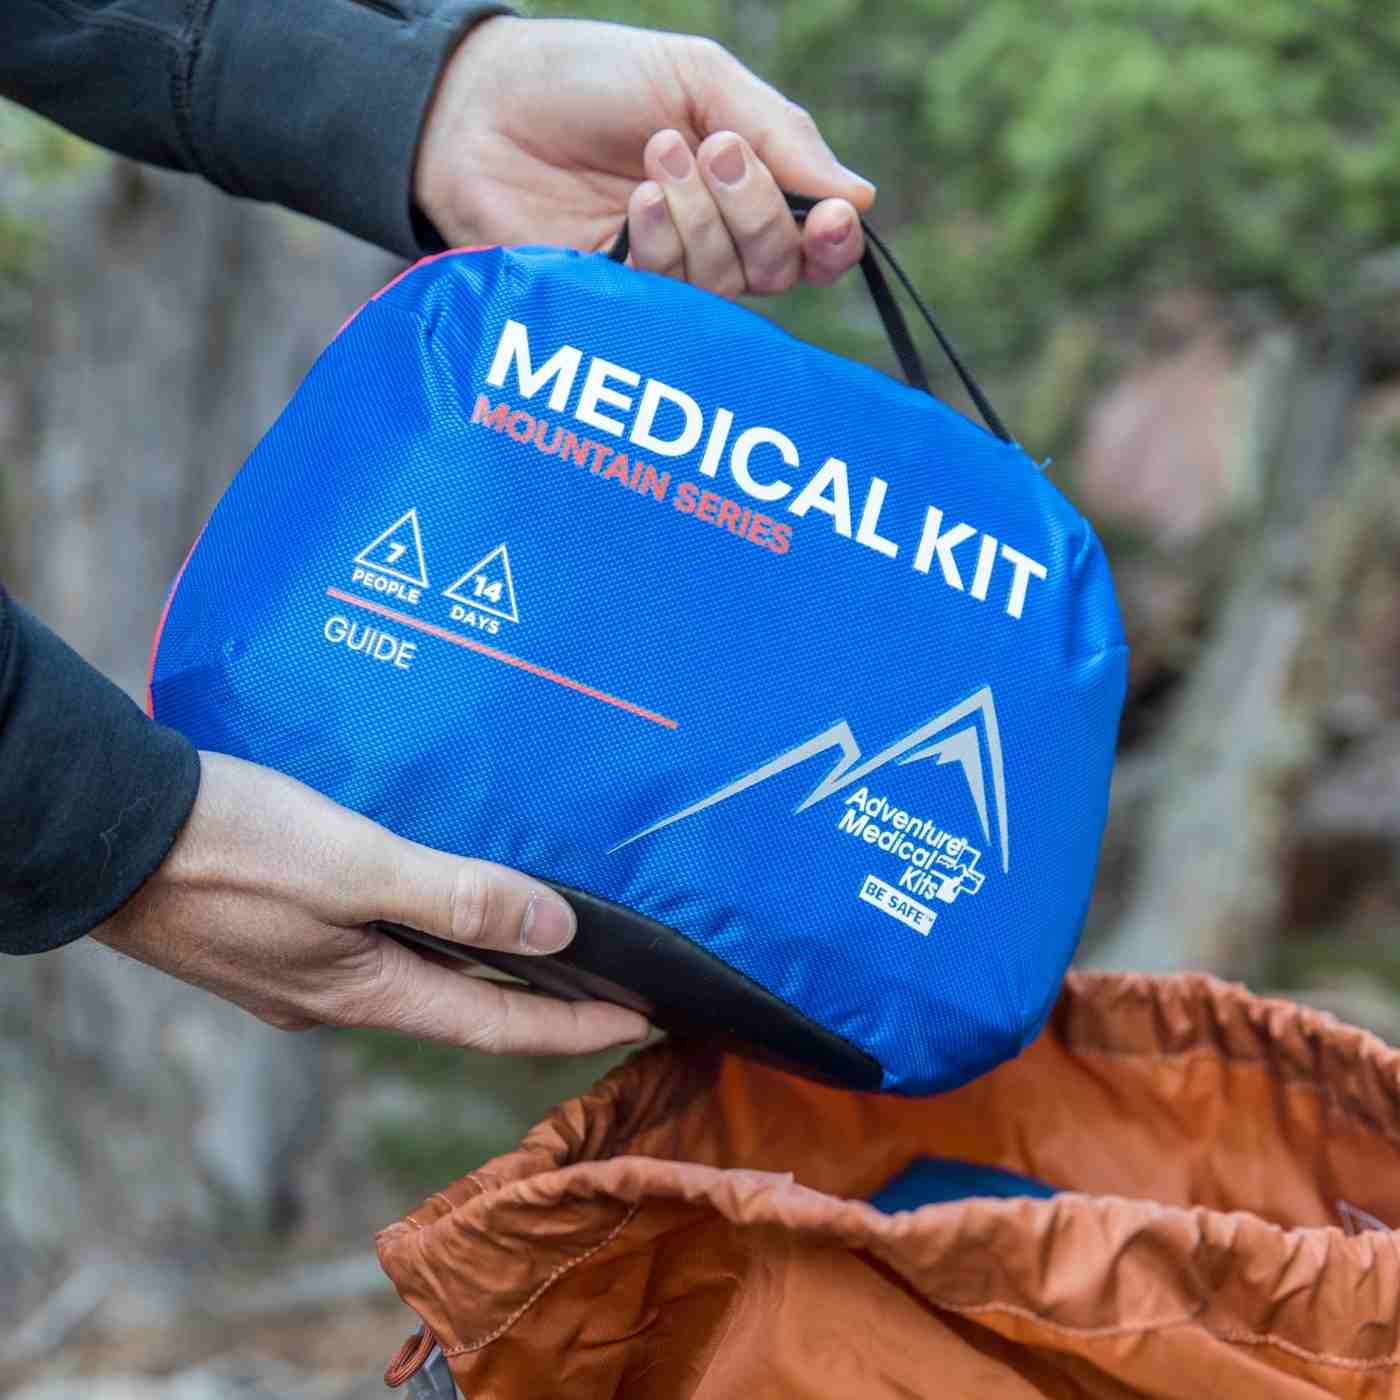 Mountain Series Medical Kit - Guide pulling from orange backpack